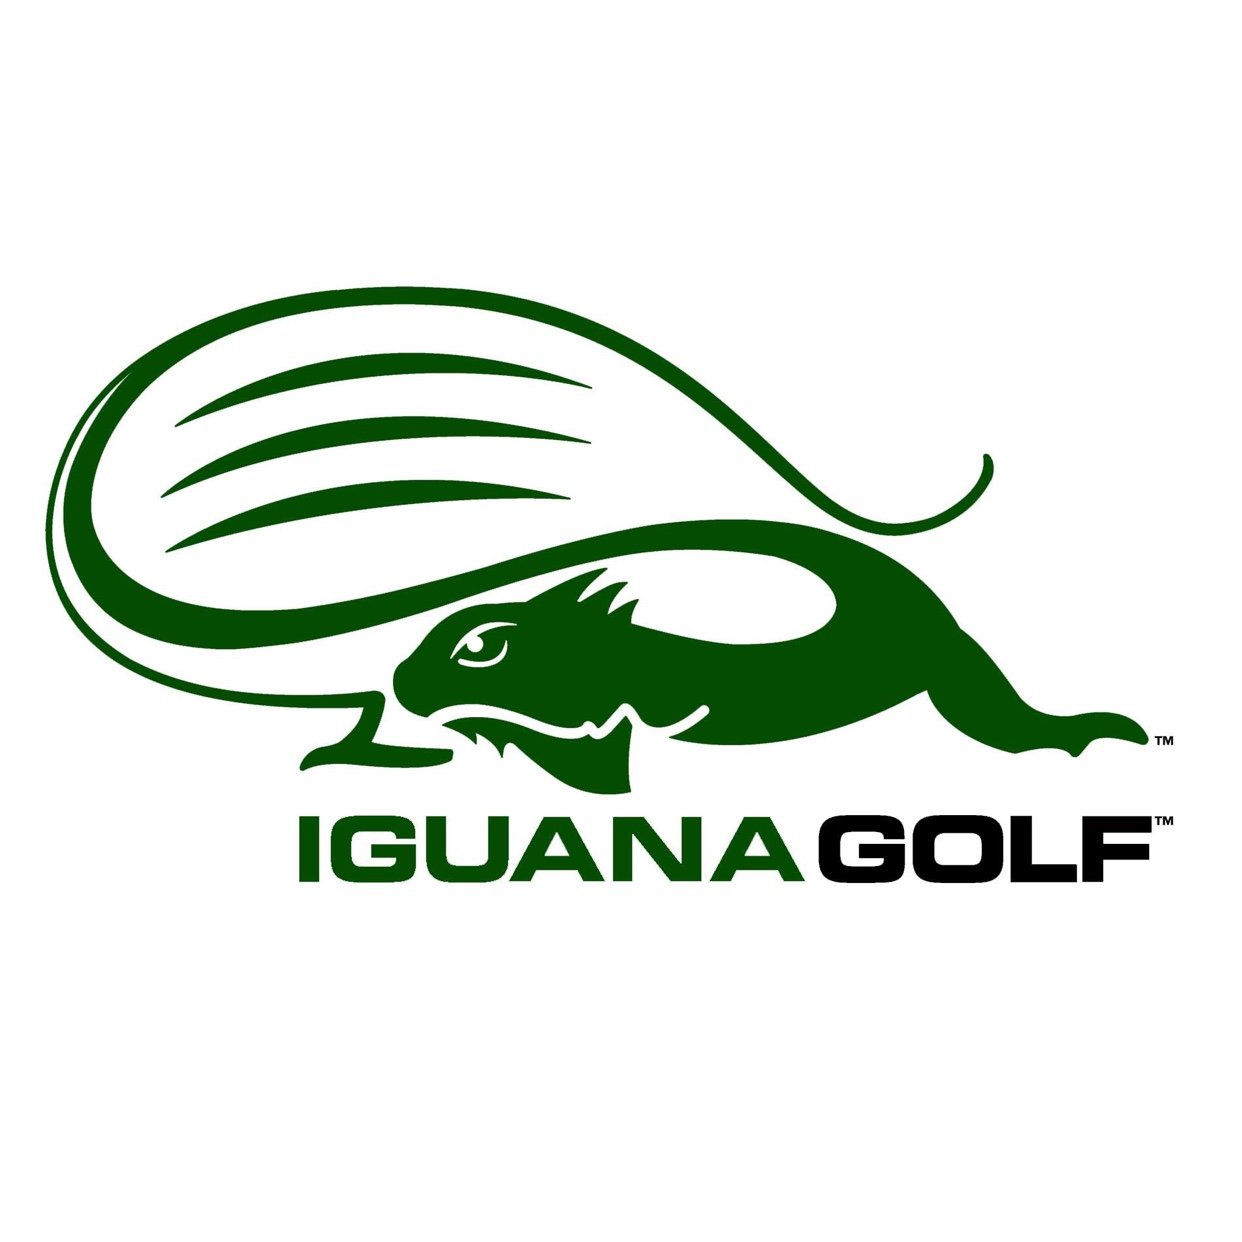 Iguana quality grips reduce torque while retaining feel & vibration absorbing features #GripYourGame